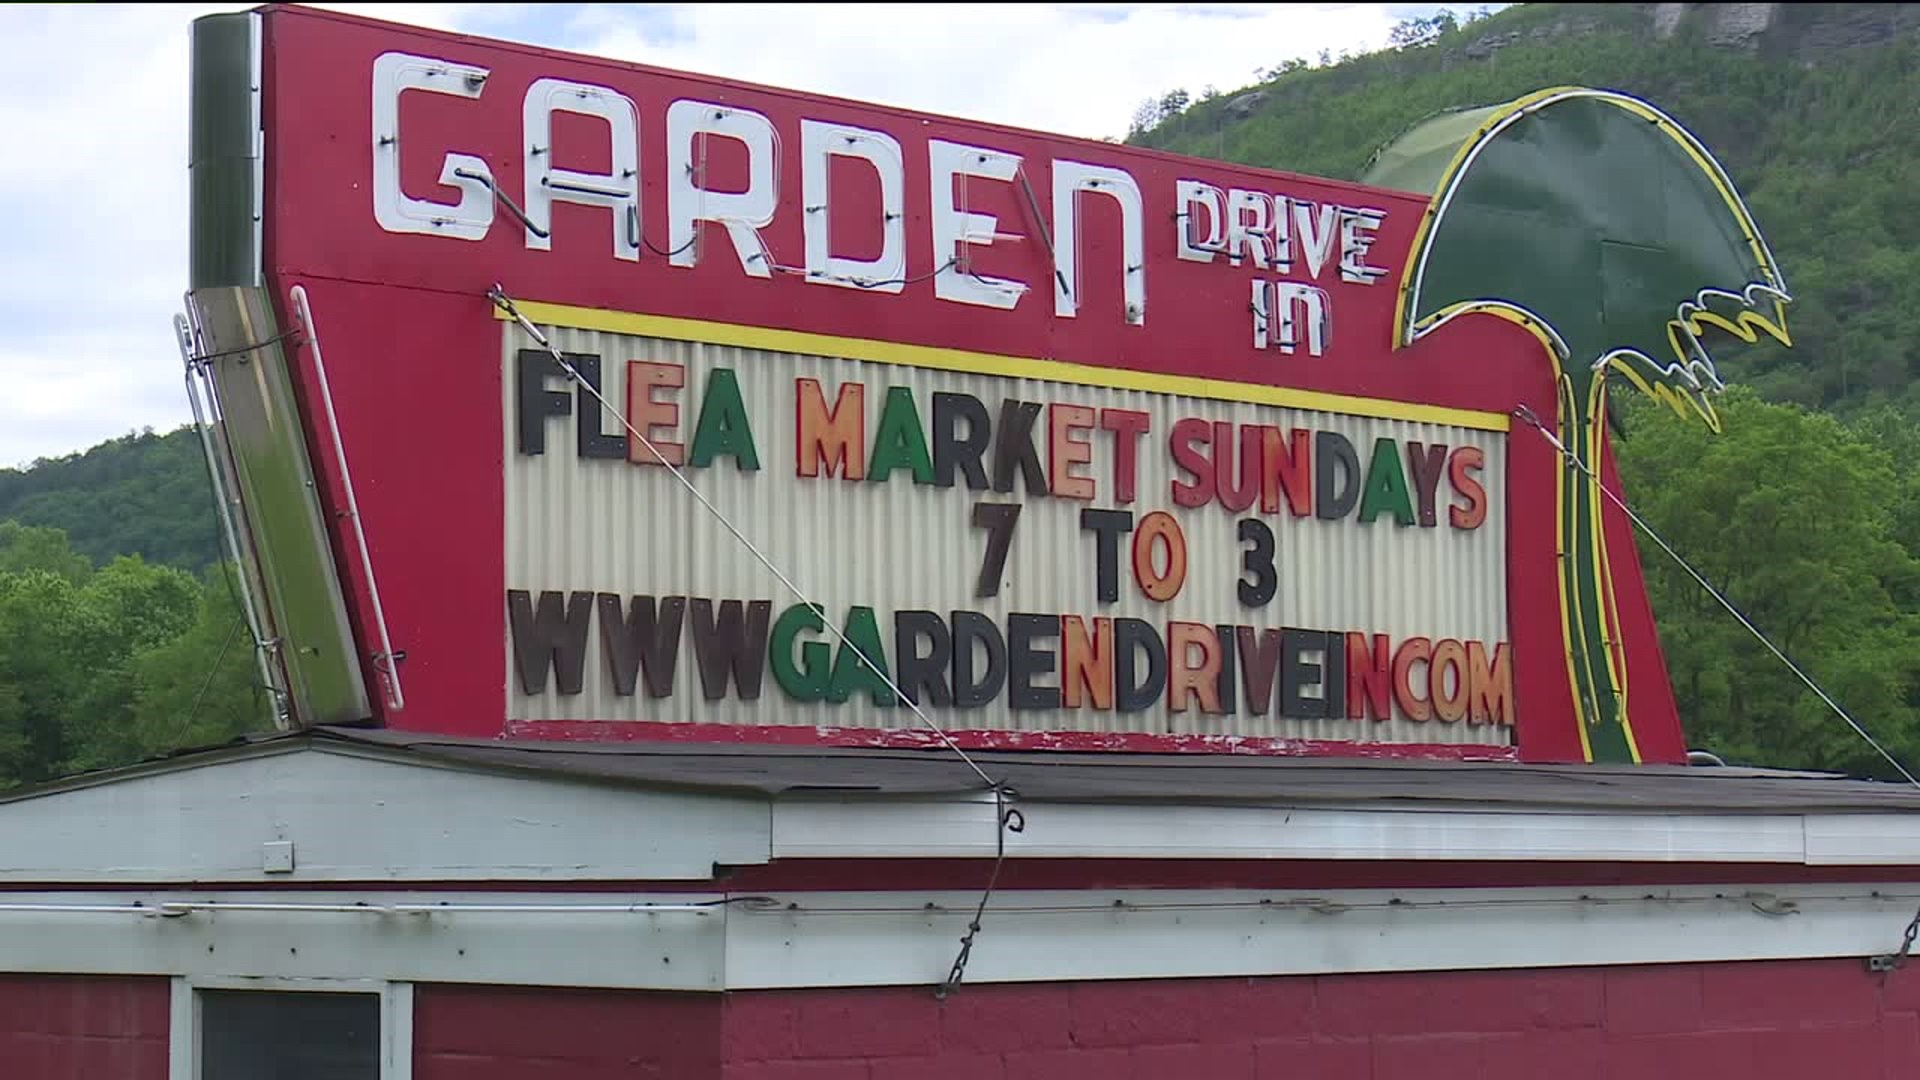 Fun for the Whole Family - Drive-In Theaters Mark Anniversary